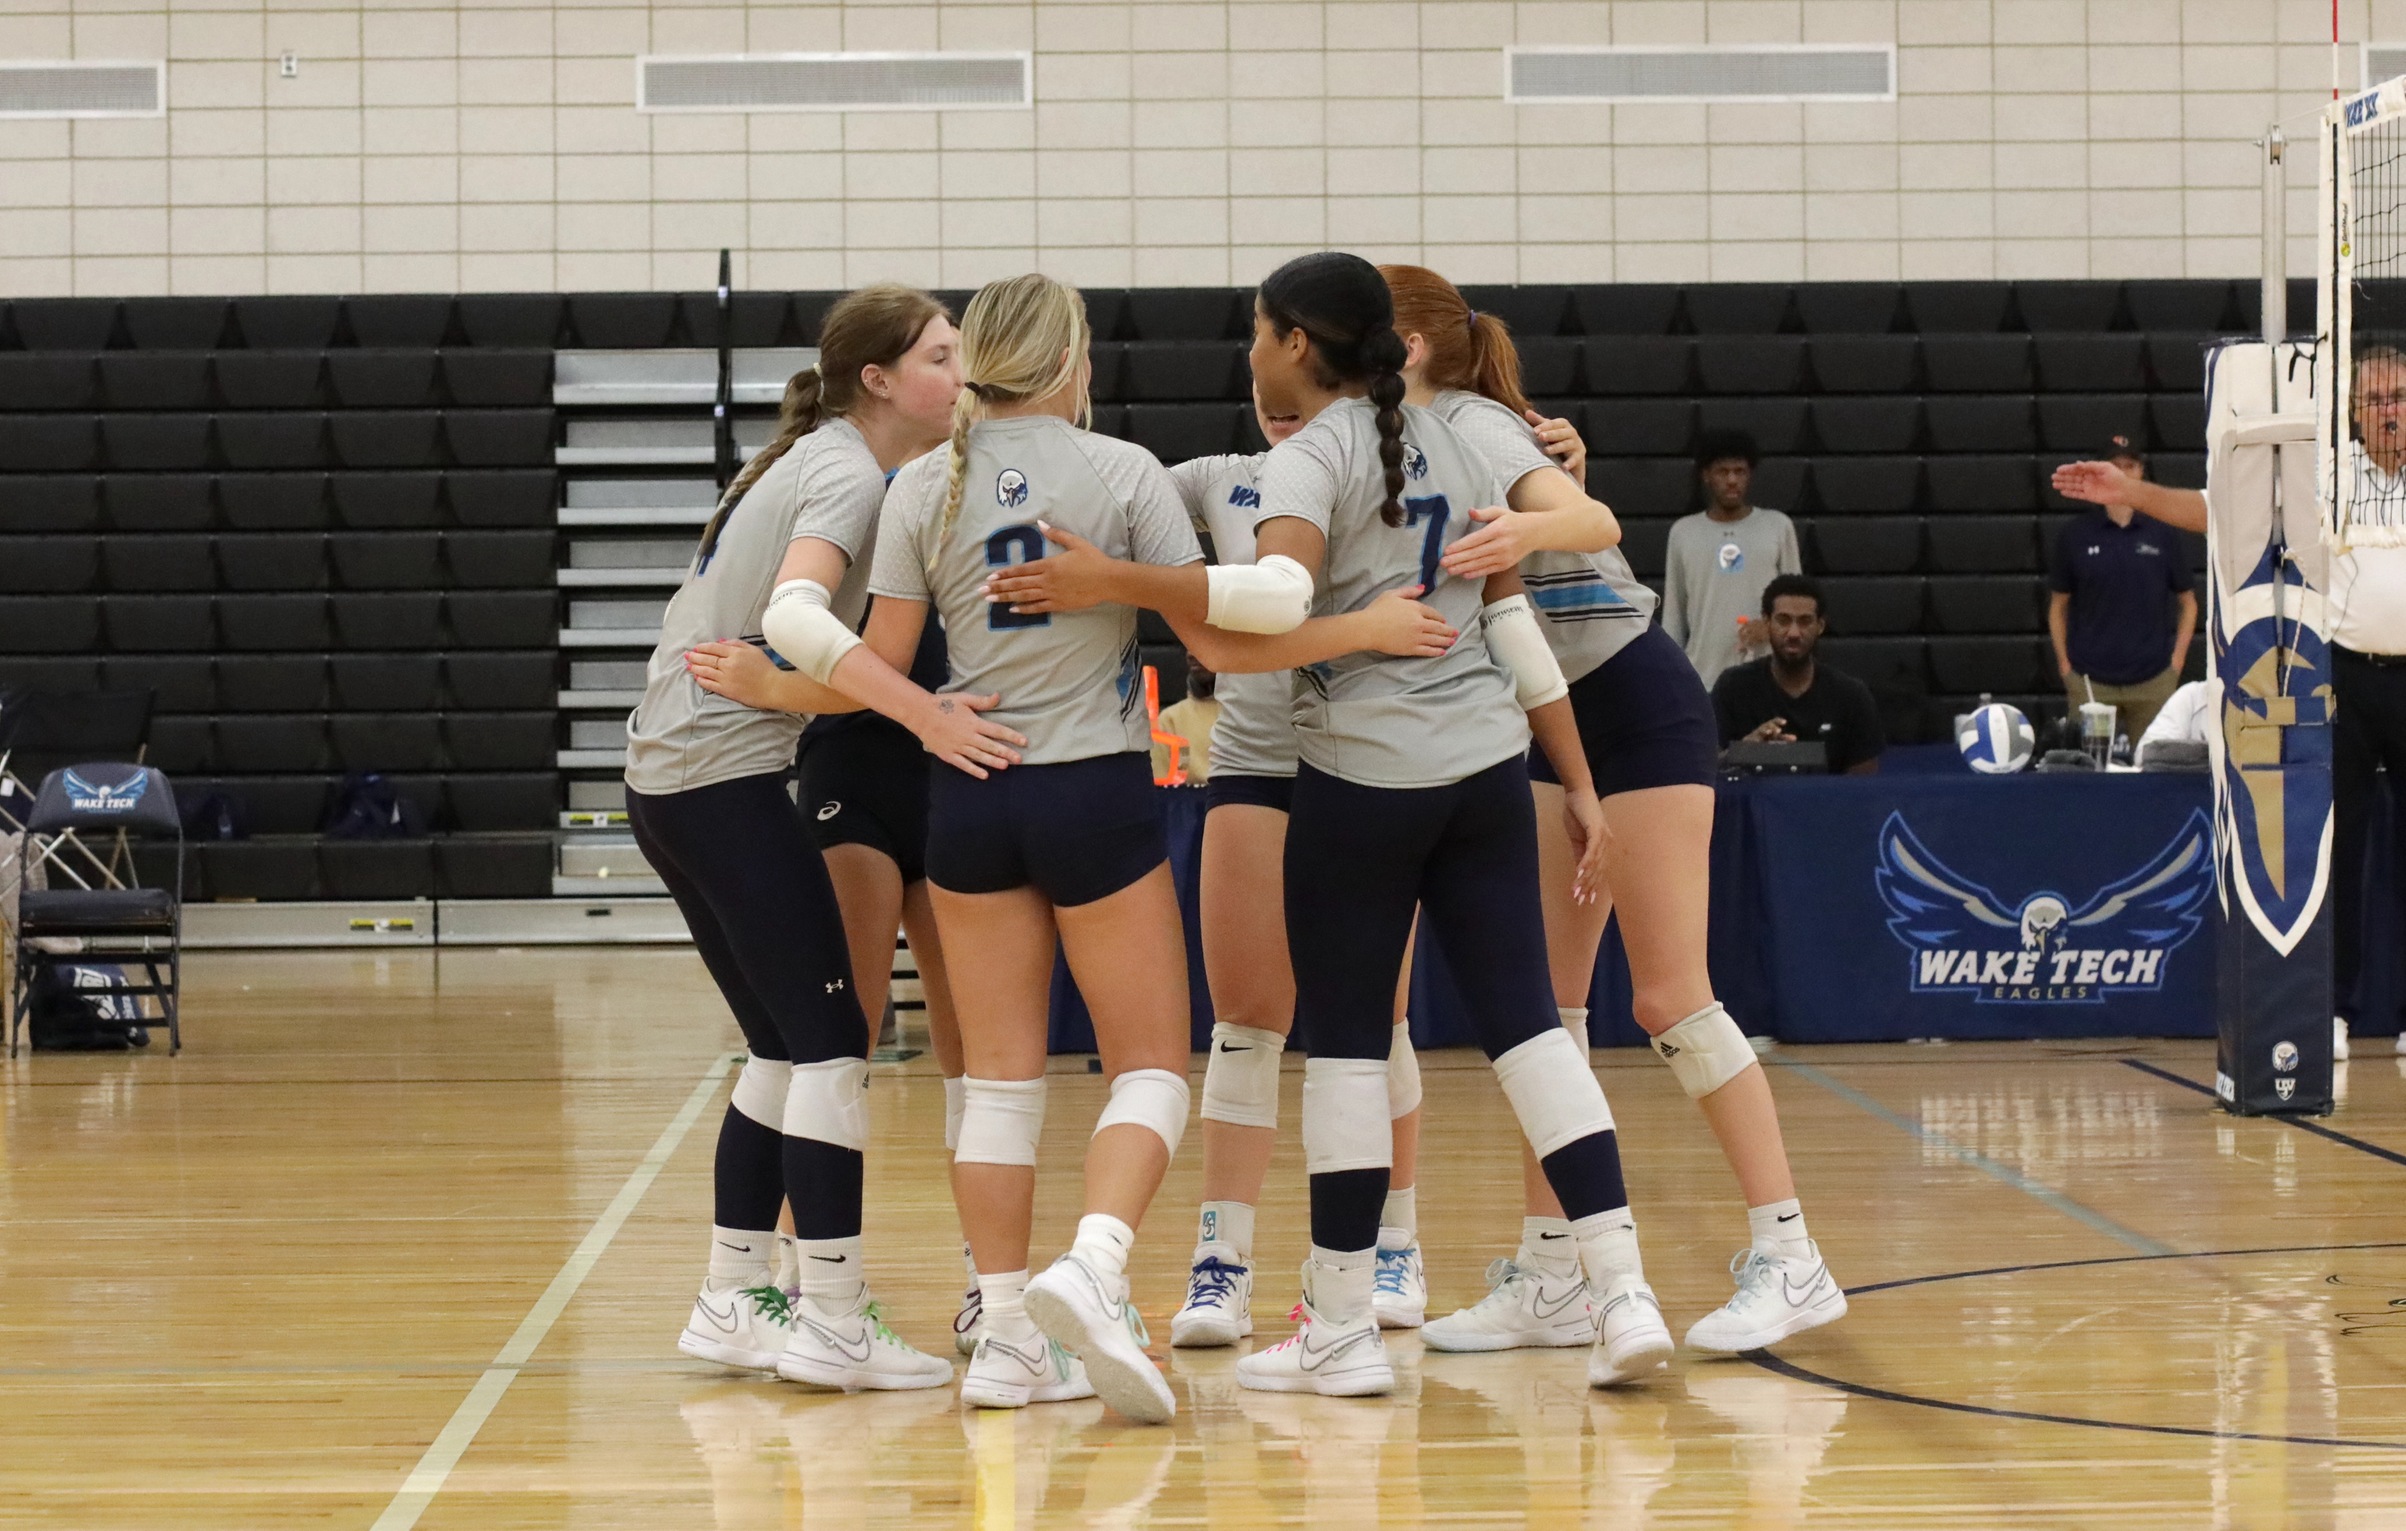 Wake Tech Volleyball team huddle after scoring a point.